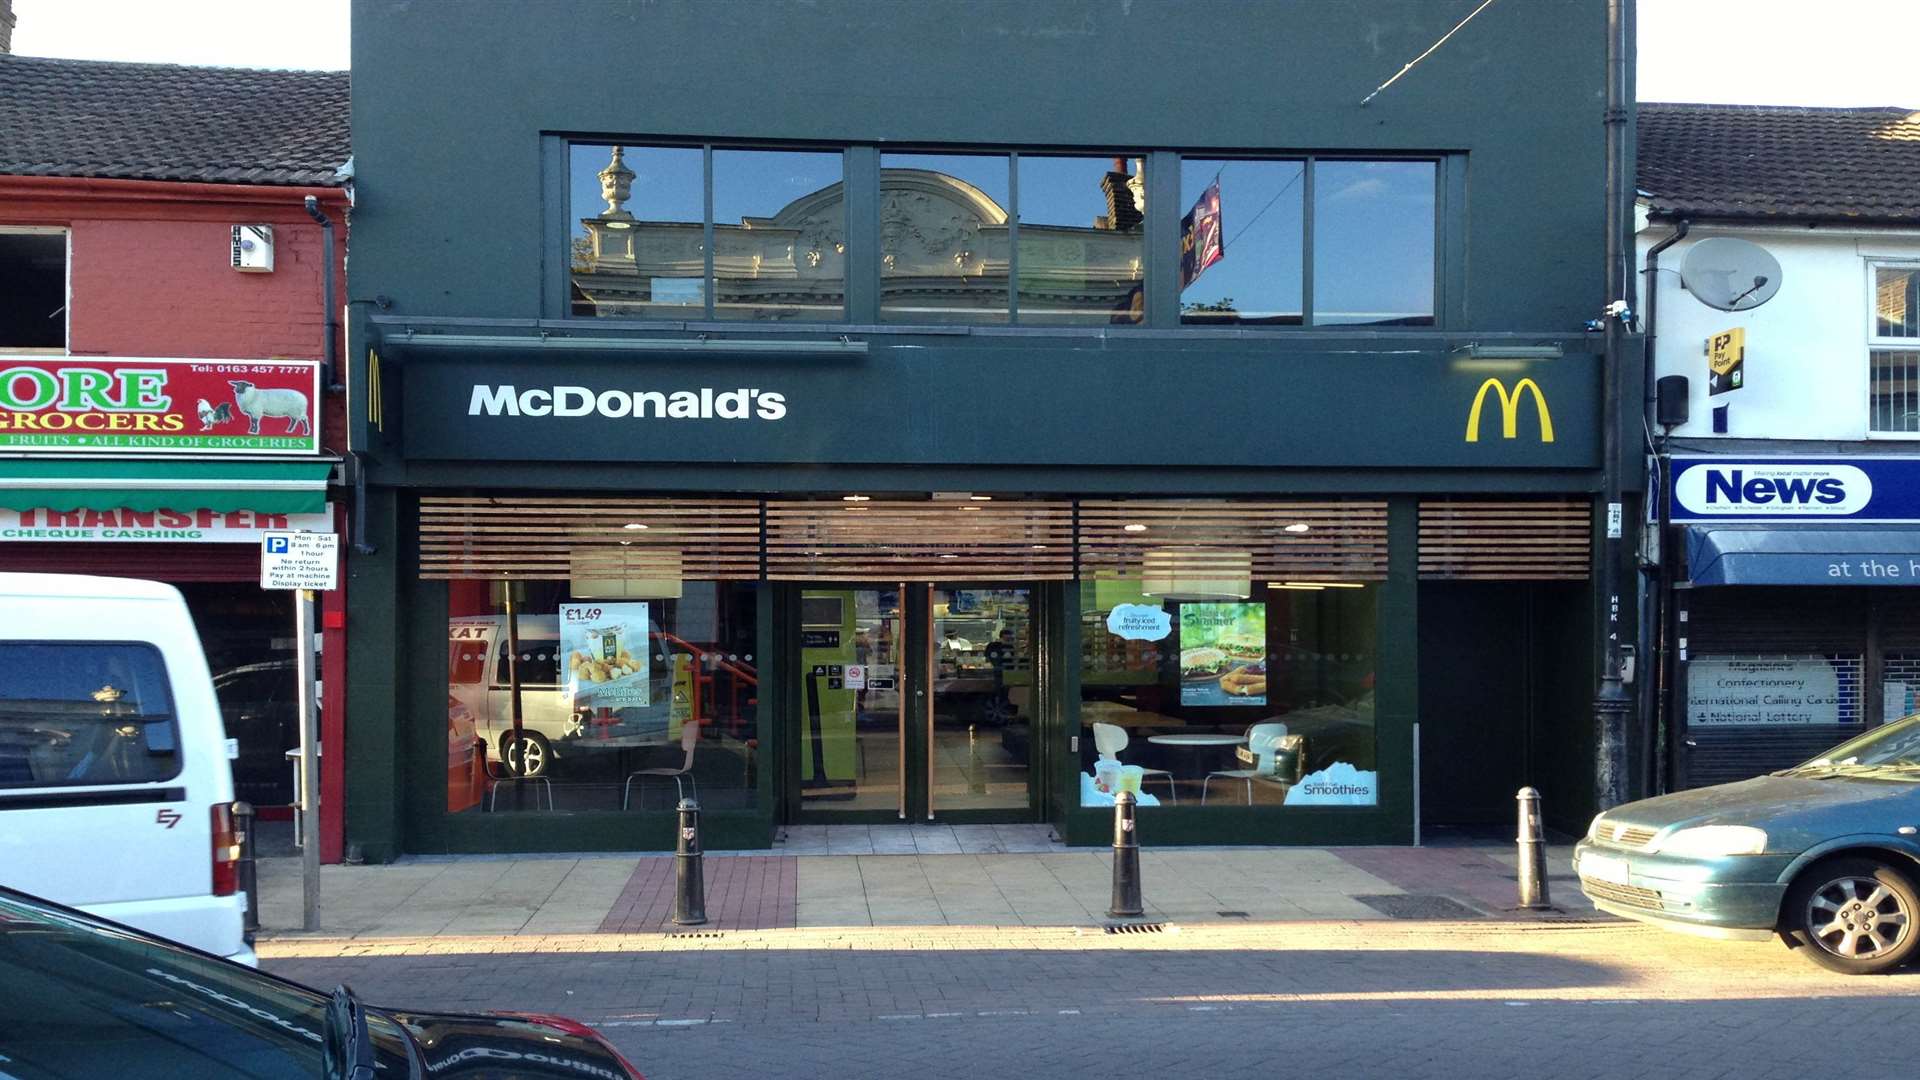 The McDonald's in Gillingham High Street has kept the ban